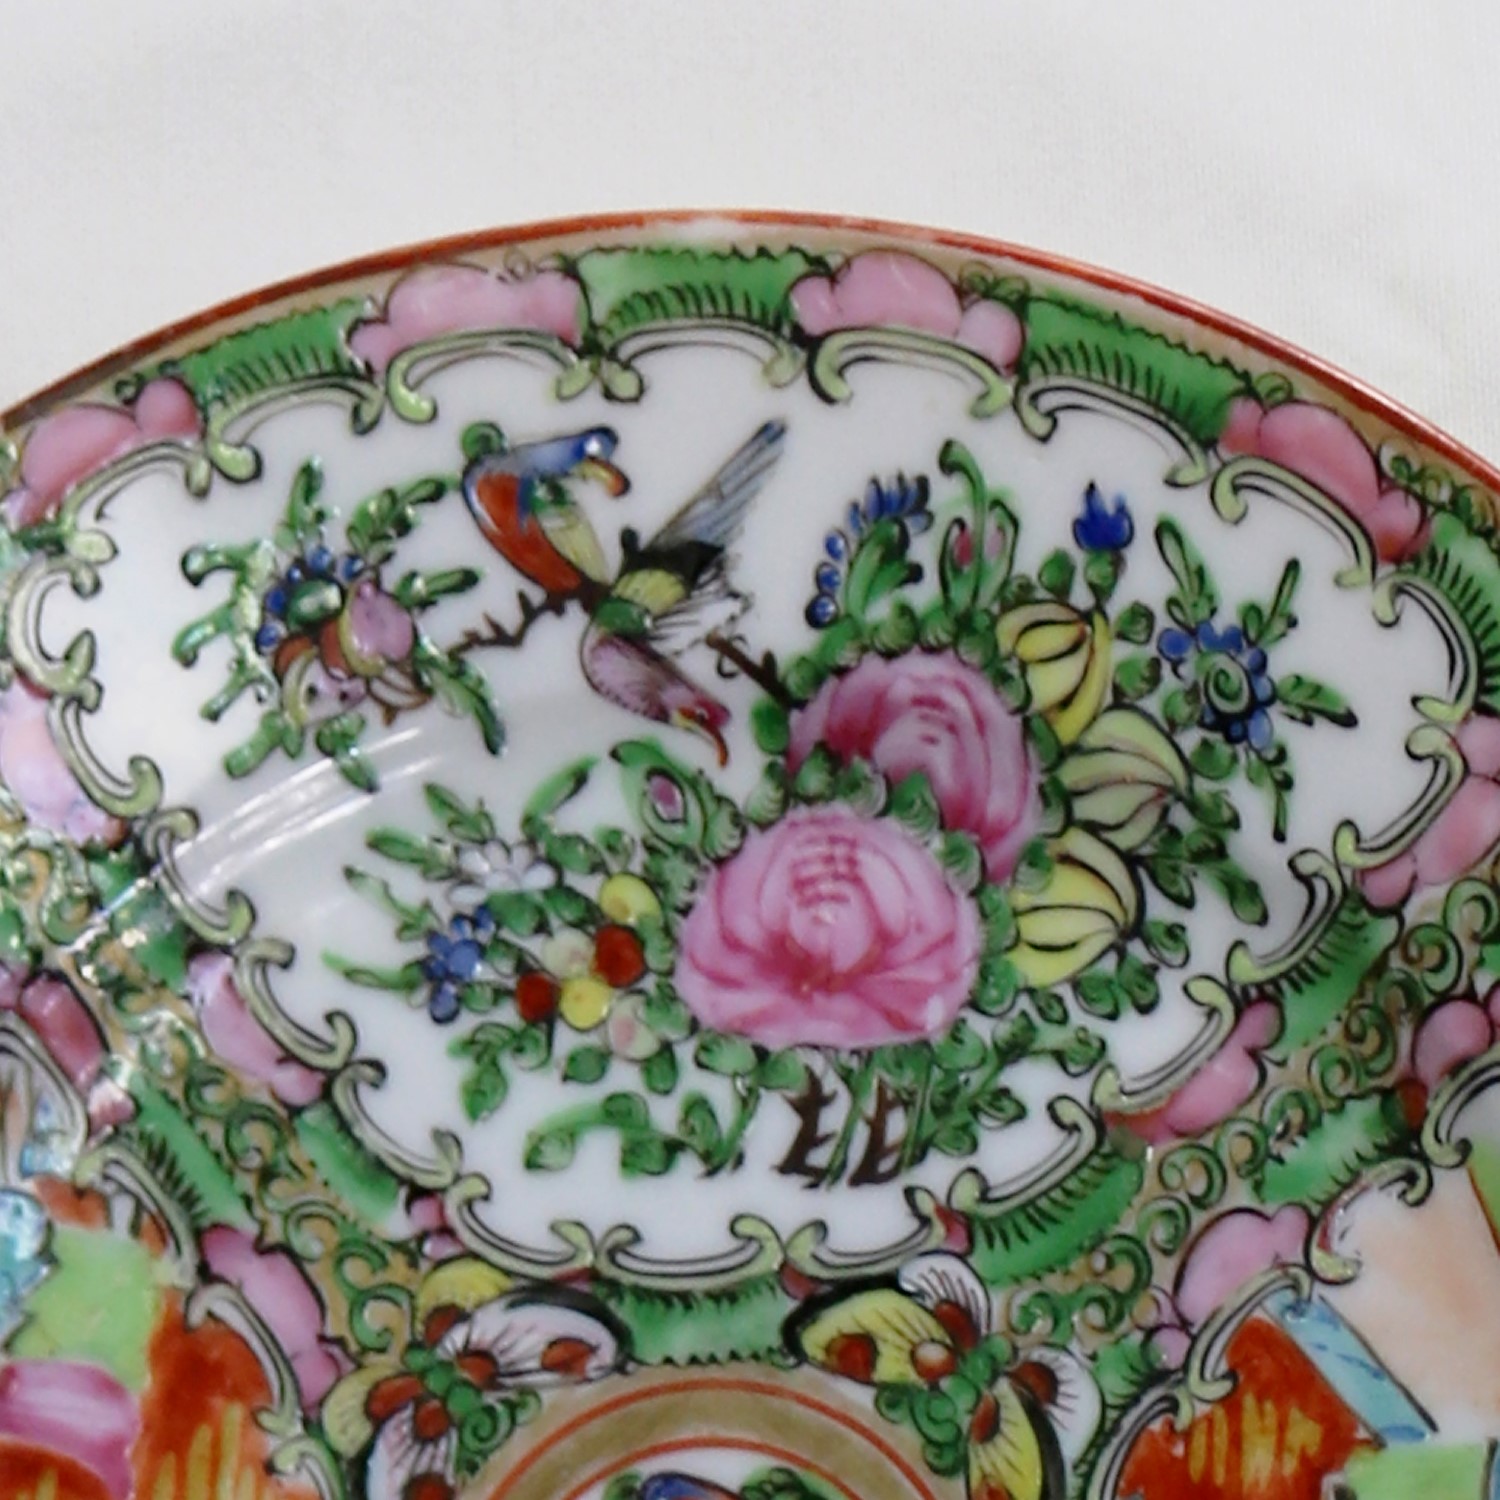 Antique Chinese Qing Rose Medallion Porcelain Nine Inch Plates Traditional Design Set of 4 Peeking - 2 and 2